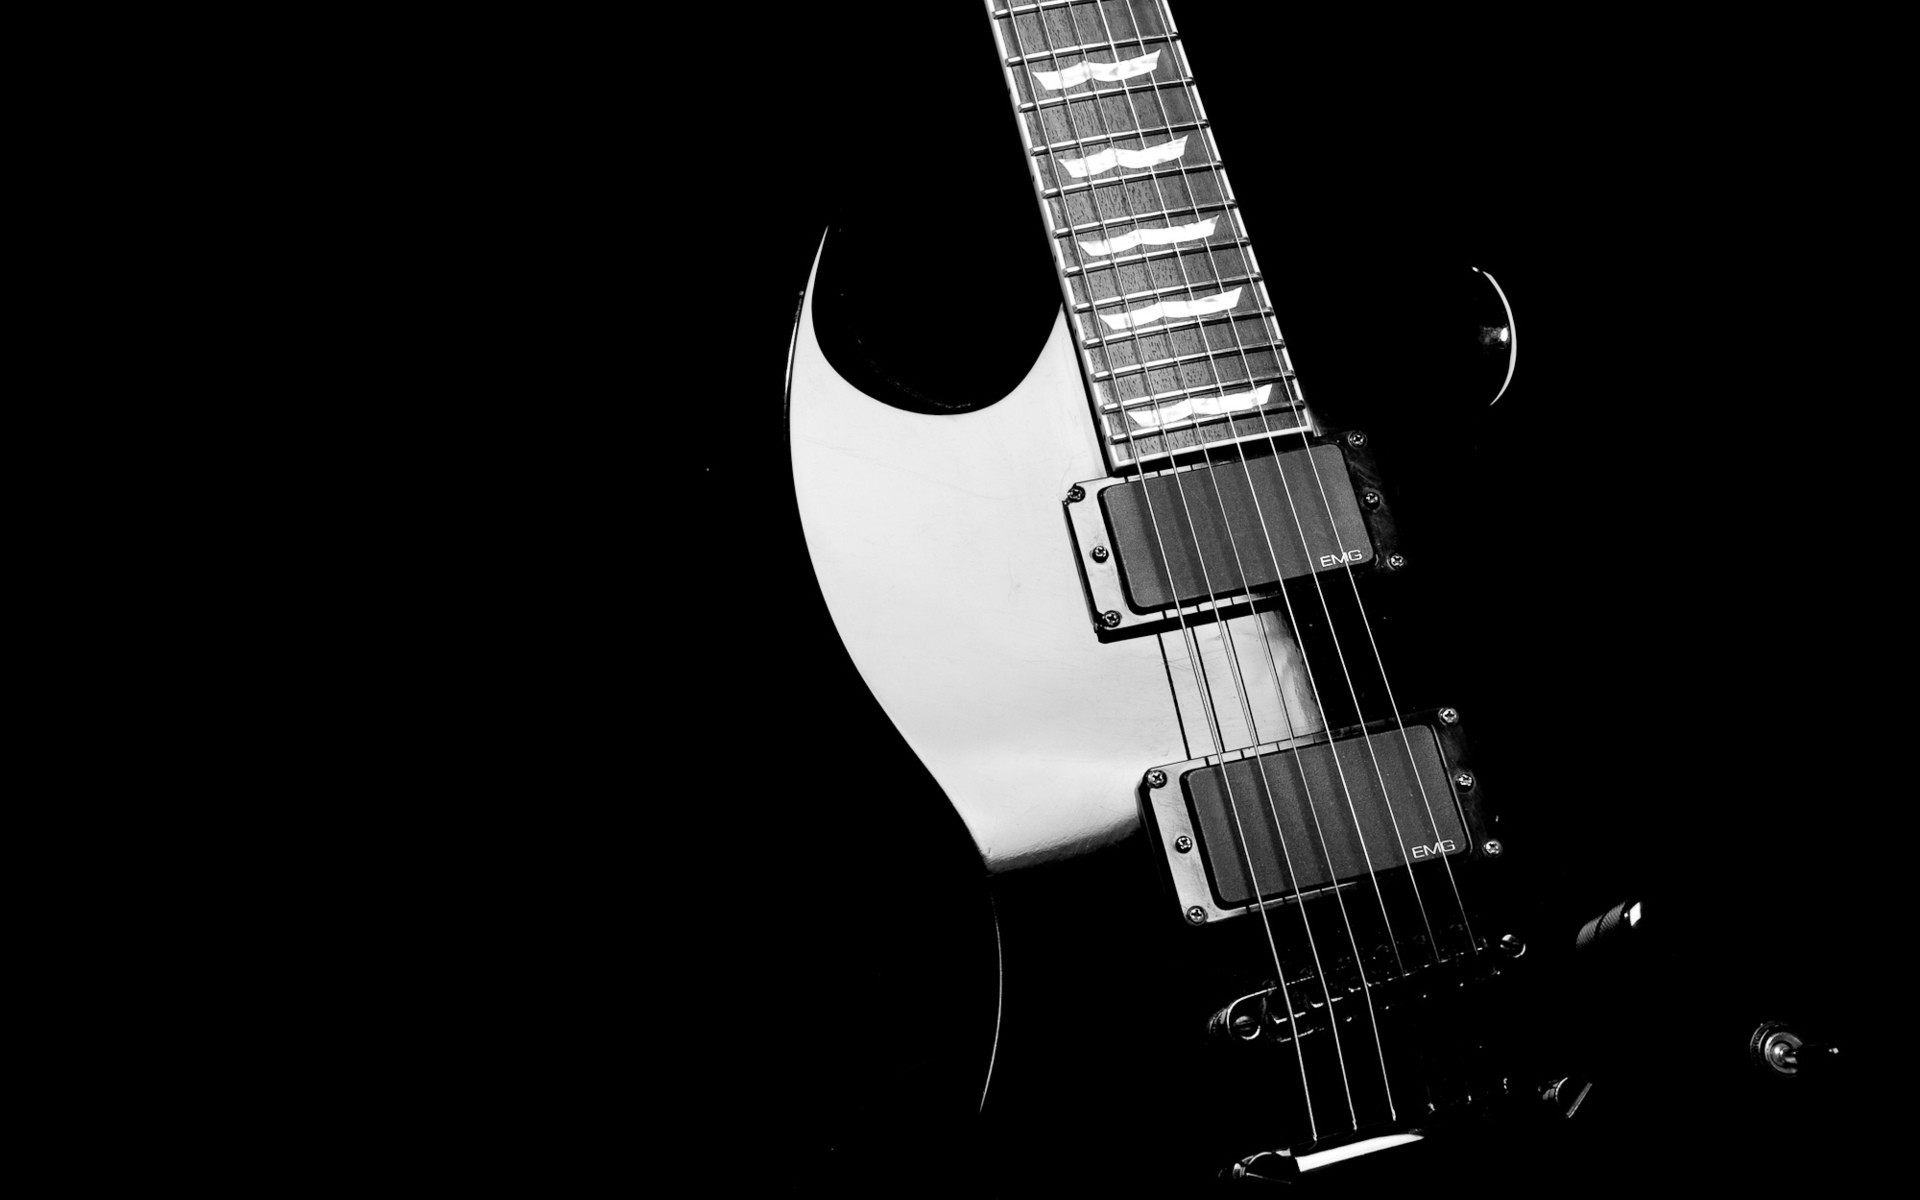 1920x1200  Cool Guitar Wallpapers | HD Wallpapers | Pinterest | Guitars,  Wallpaper and Hd wallpaper